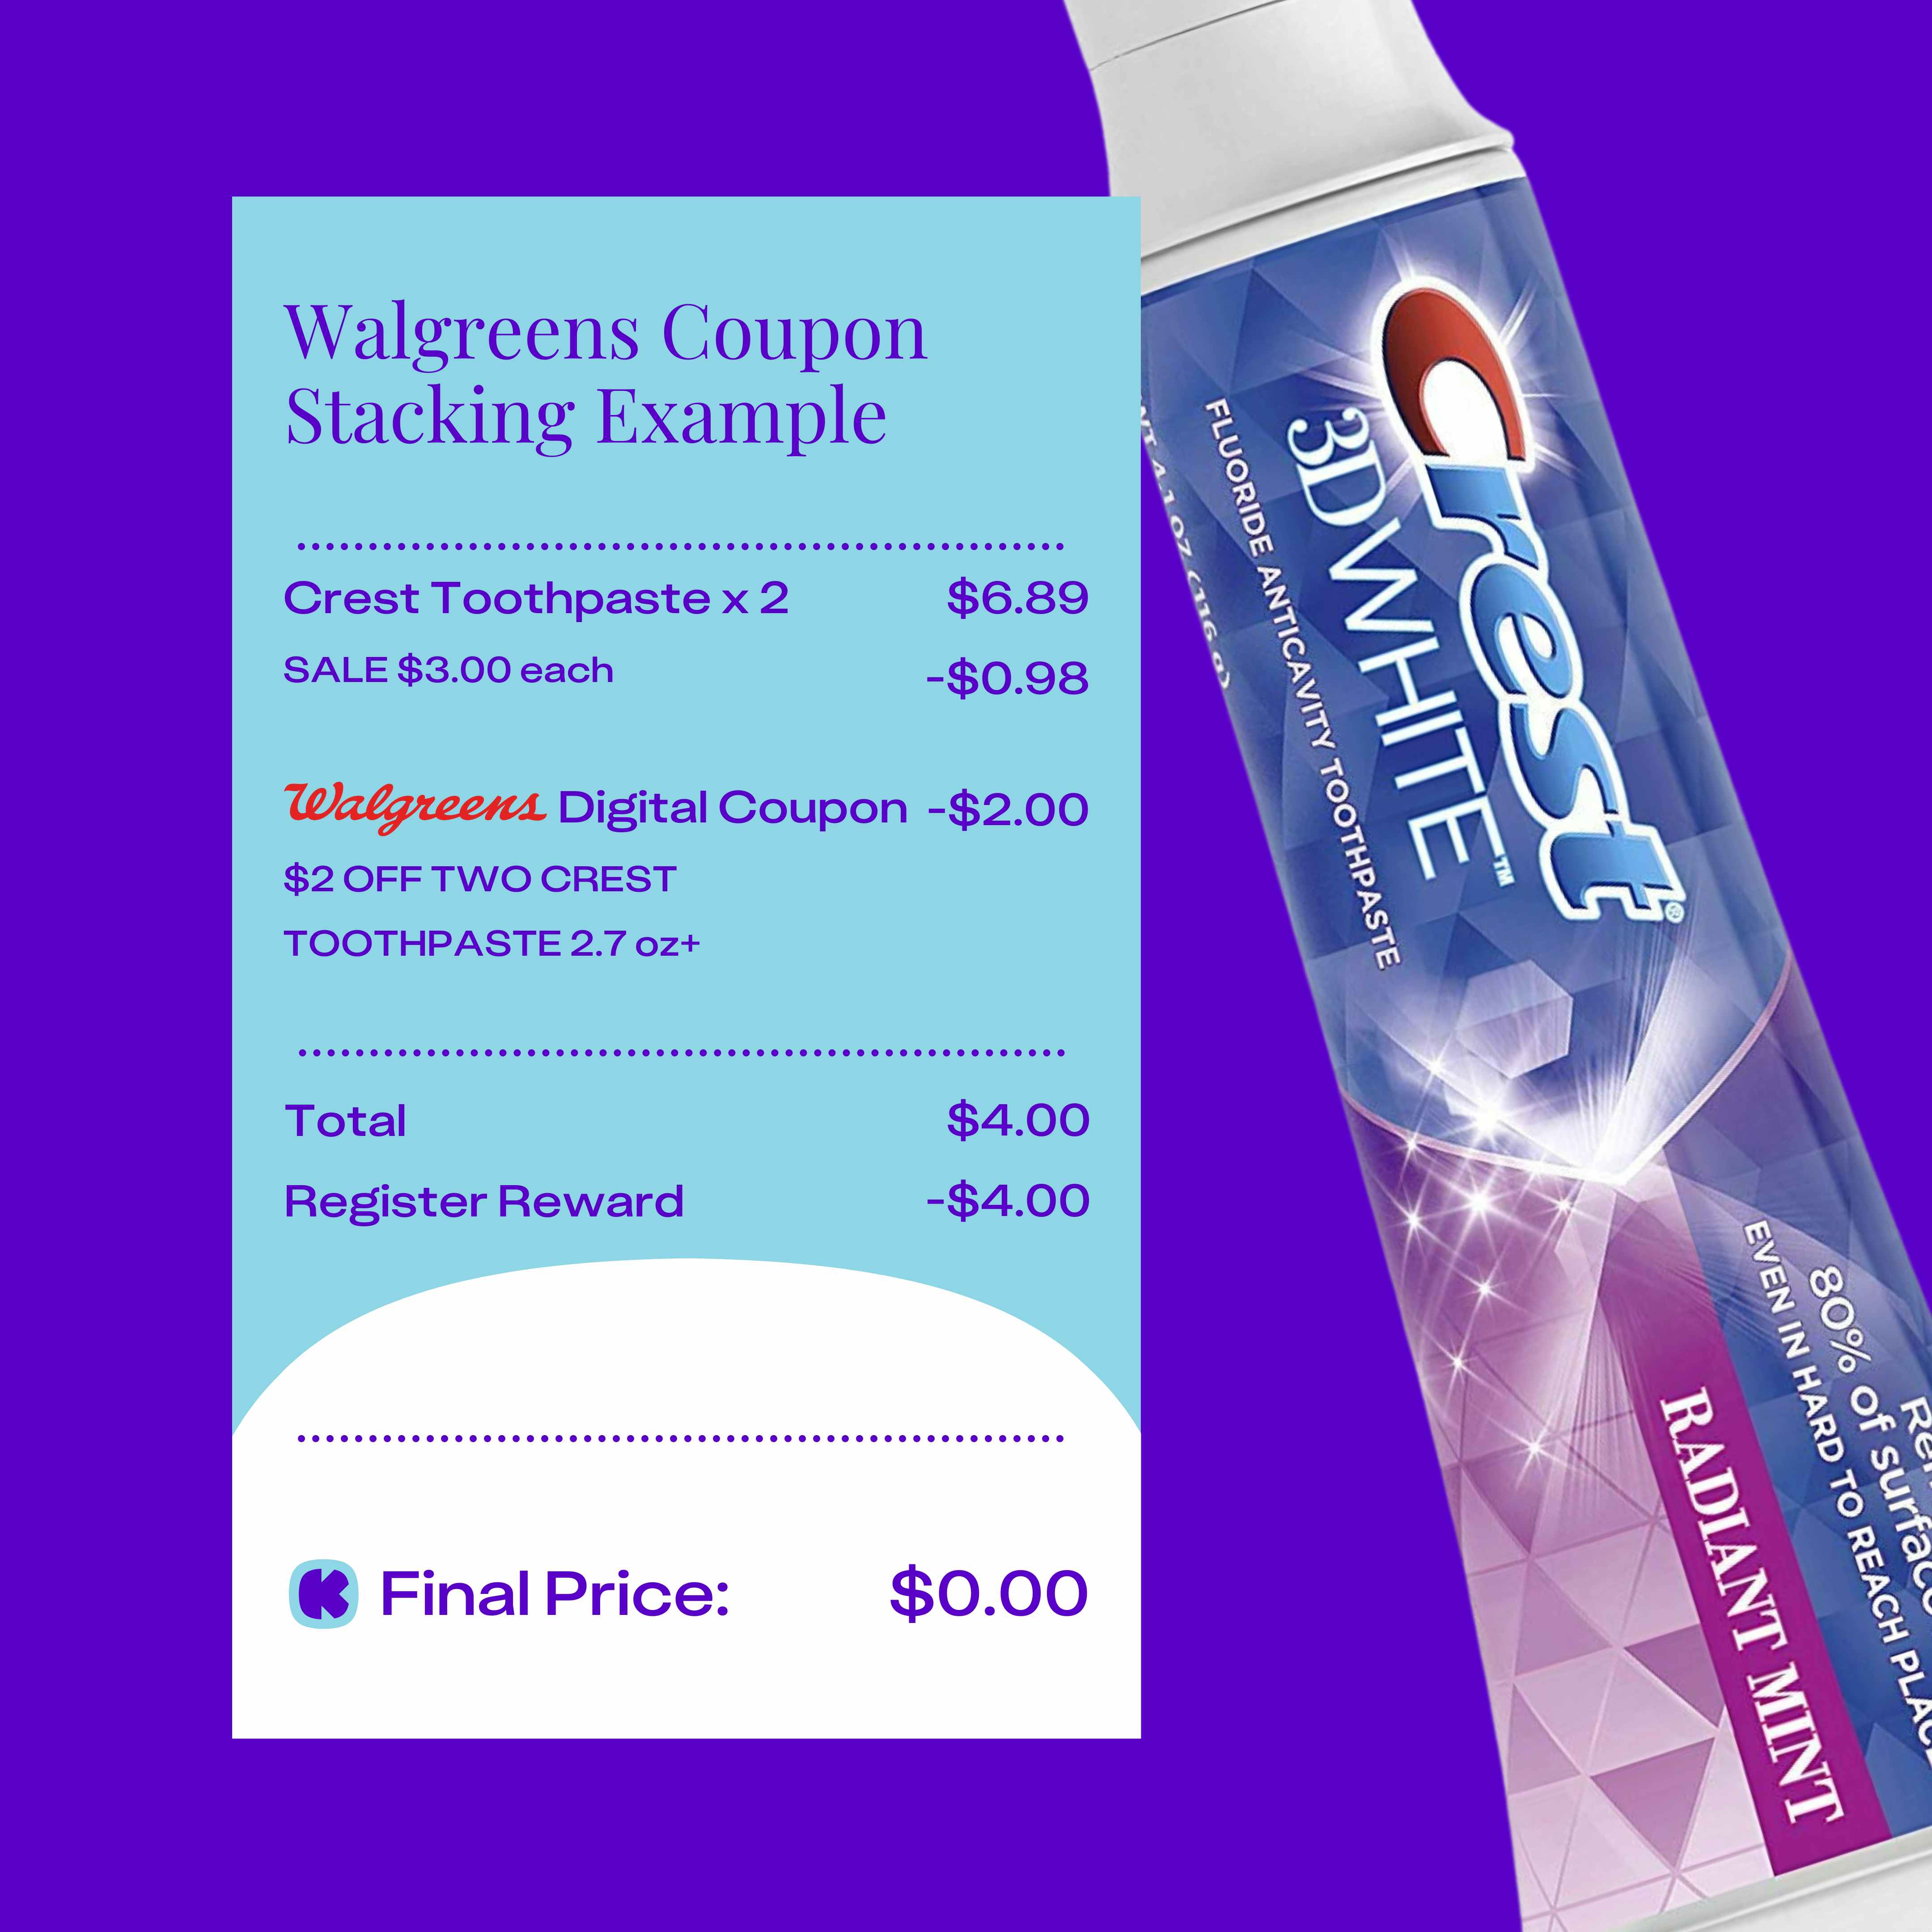 Walgreens coupon stacking example using sale prices, store coupons, and Register Rewards.